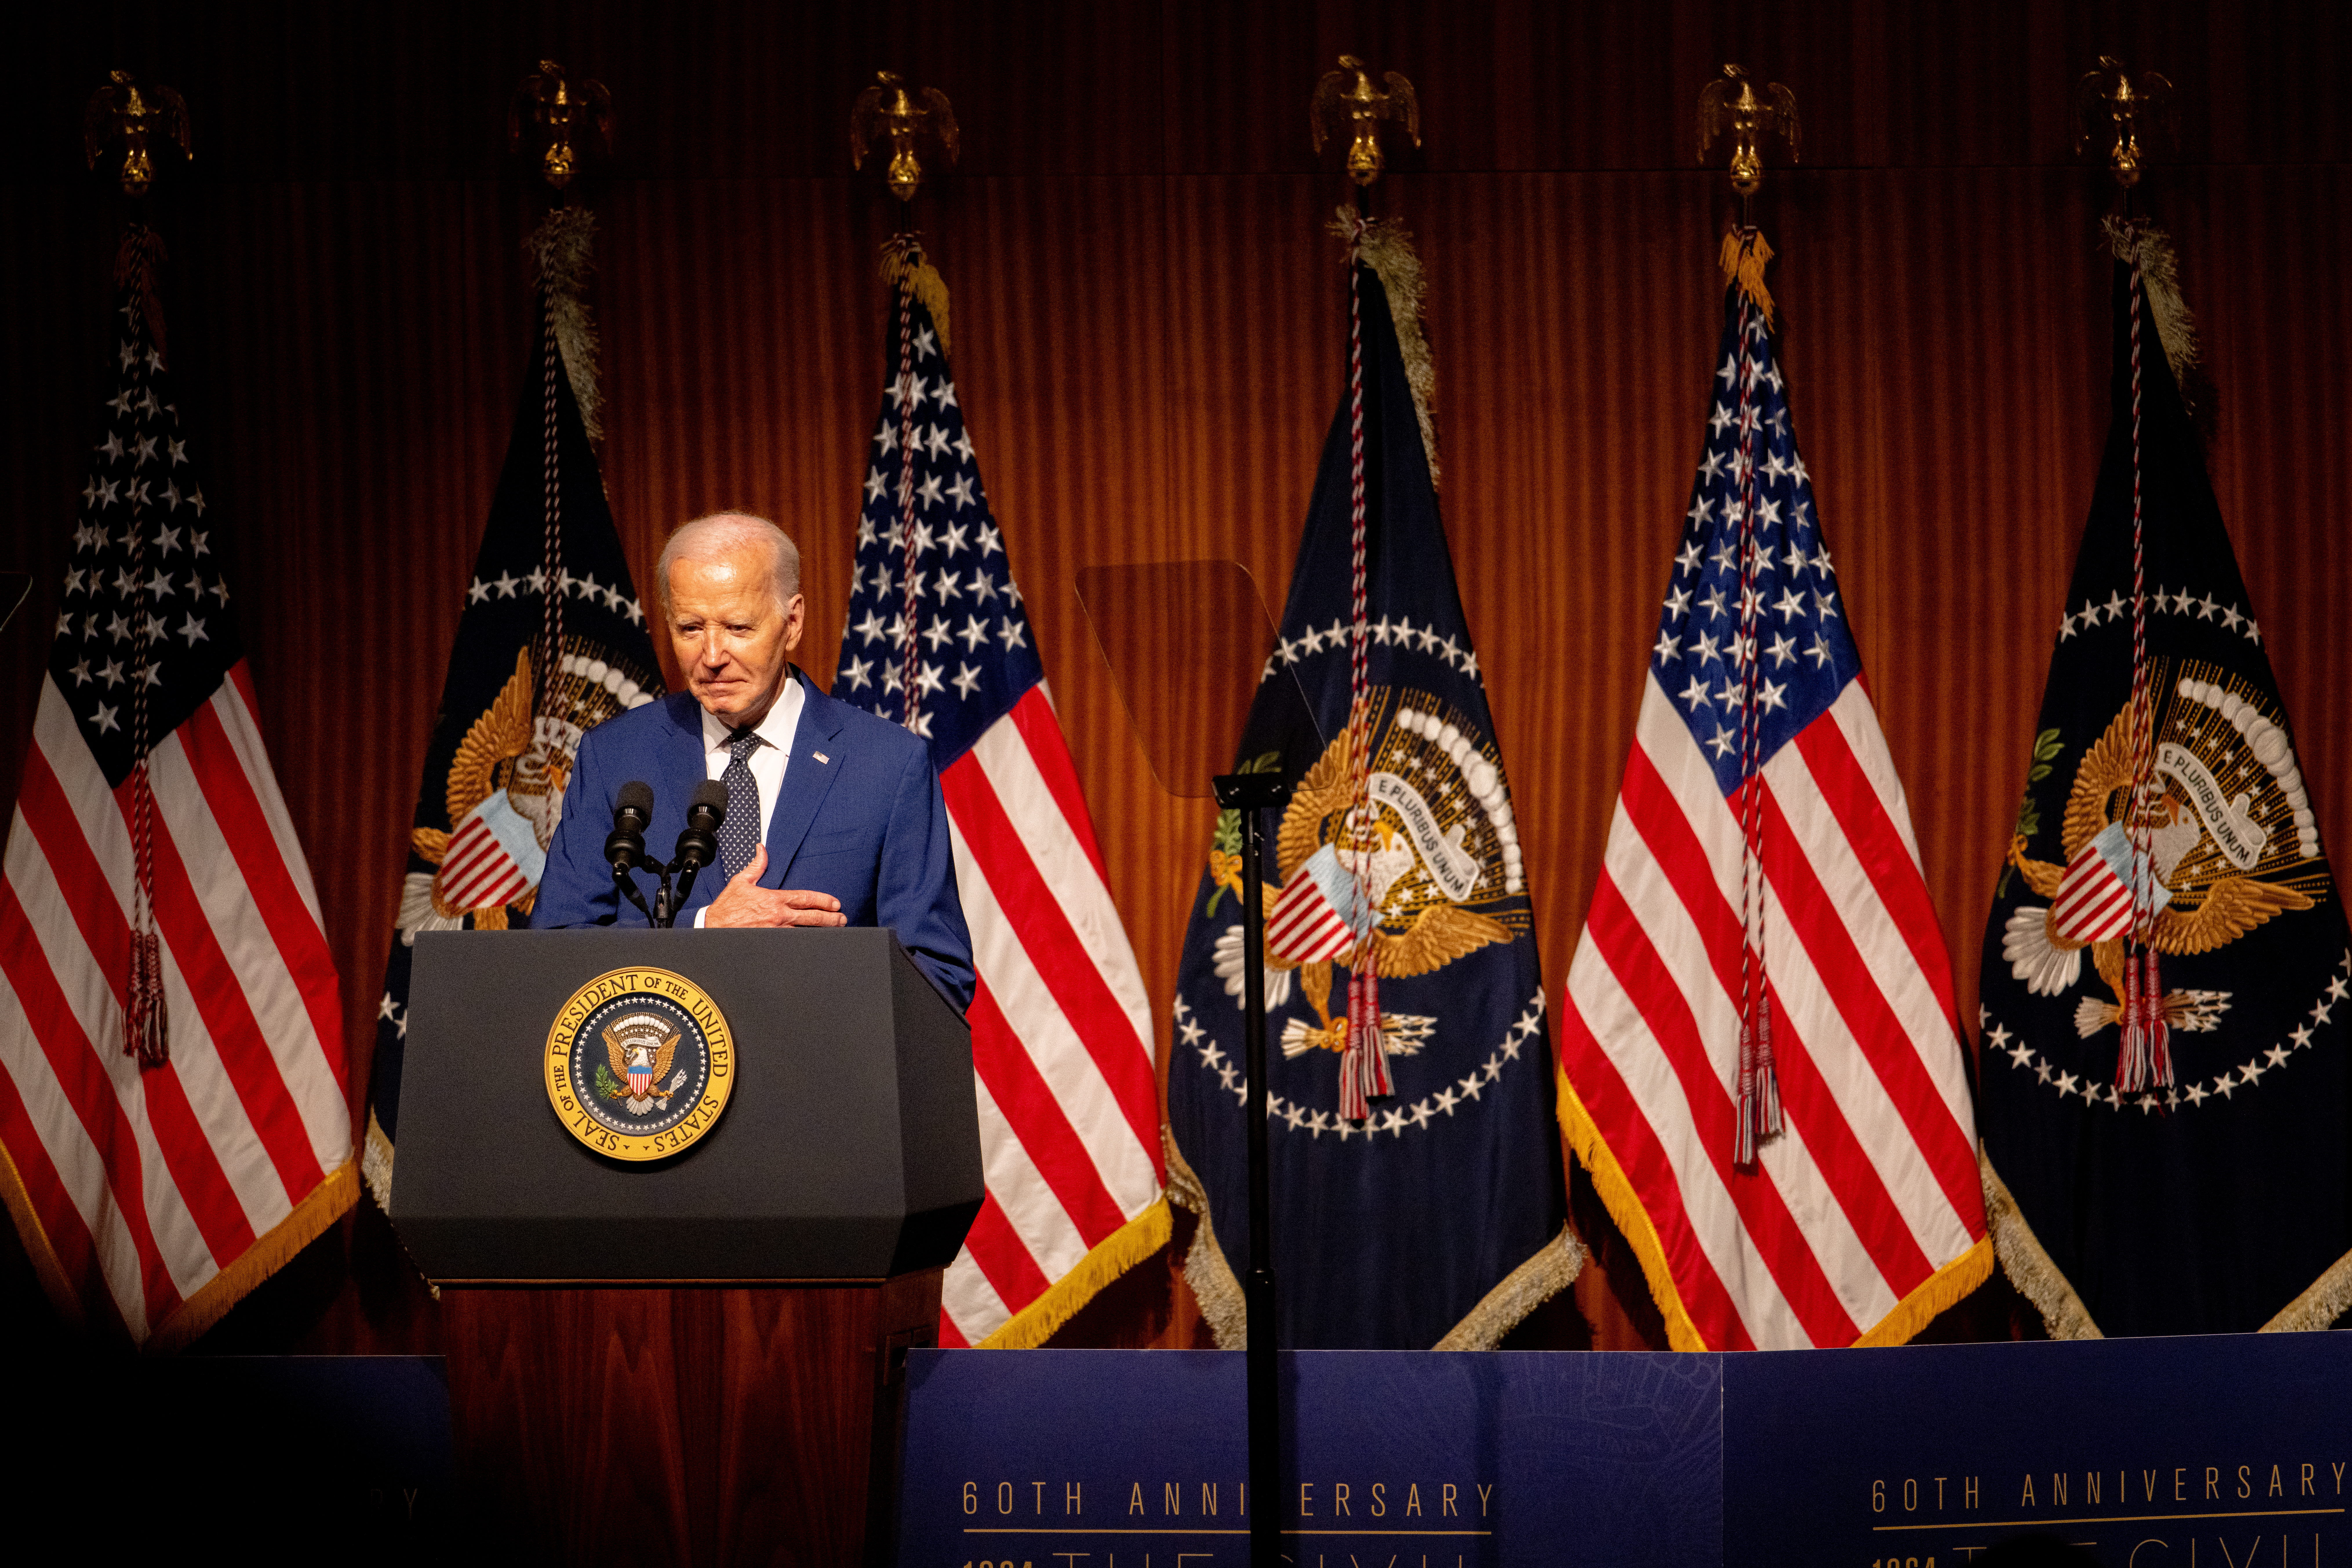 AUSTIN, TEXAS - JULY 29: U.S. President Joe Biden speaks to attendees while commemorating the 60th anniversary of the Civil Rights Act at the Lyndon Baines Johnson Presidential Library on July 29, 2024 in Austin, Texas. Biden’s original visit to Austin was scheduled for July 15, but was postponed after the attempted assassination of former President Donald Trump during his campaign rally in Butler, Pennsylvania. Today's event served to commemorate legislation that ended the institutionalized segregation of the Jim Crow era. (Photo by Brandon Bell/Getty Images)